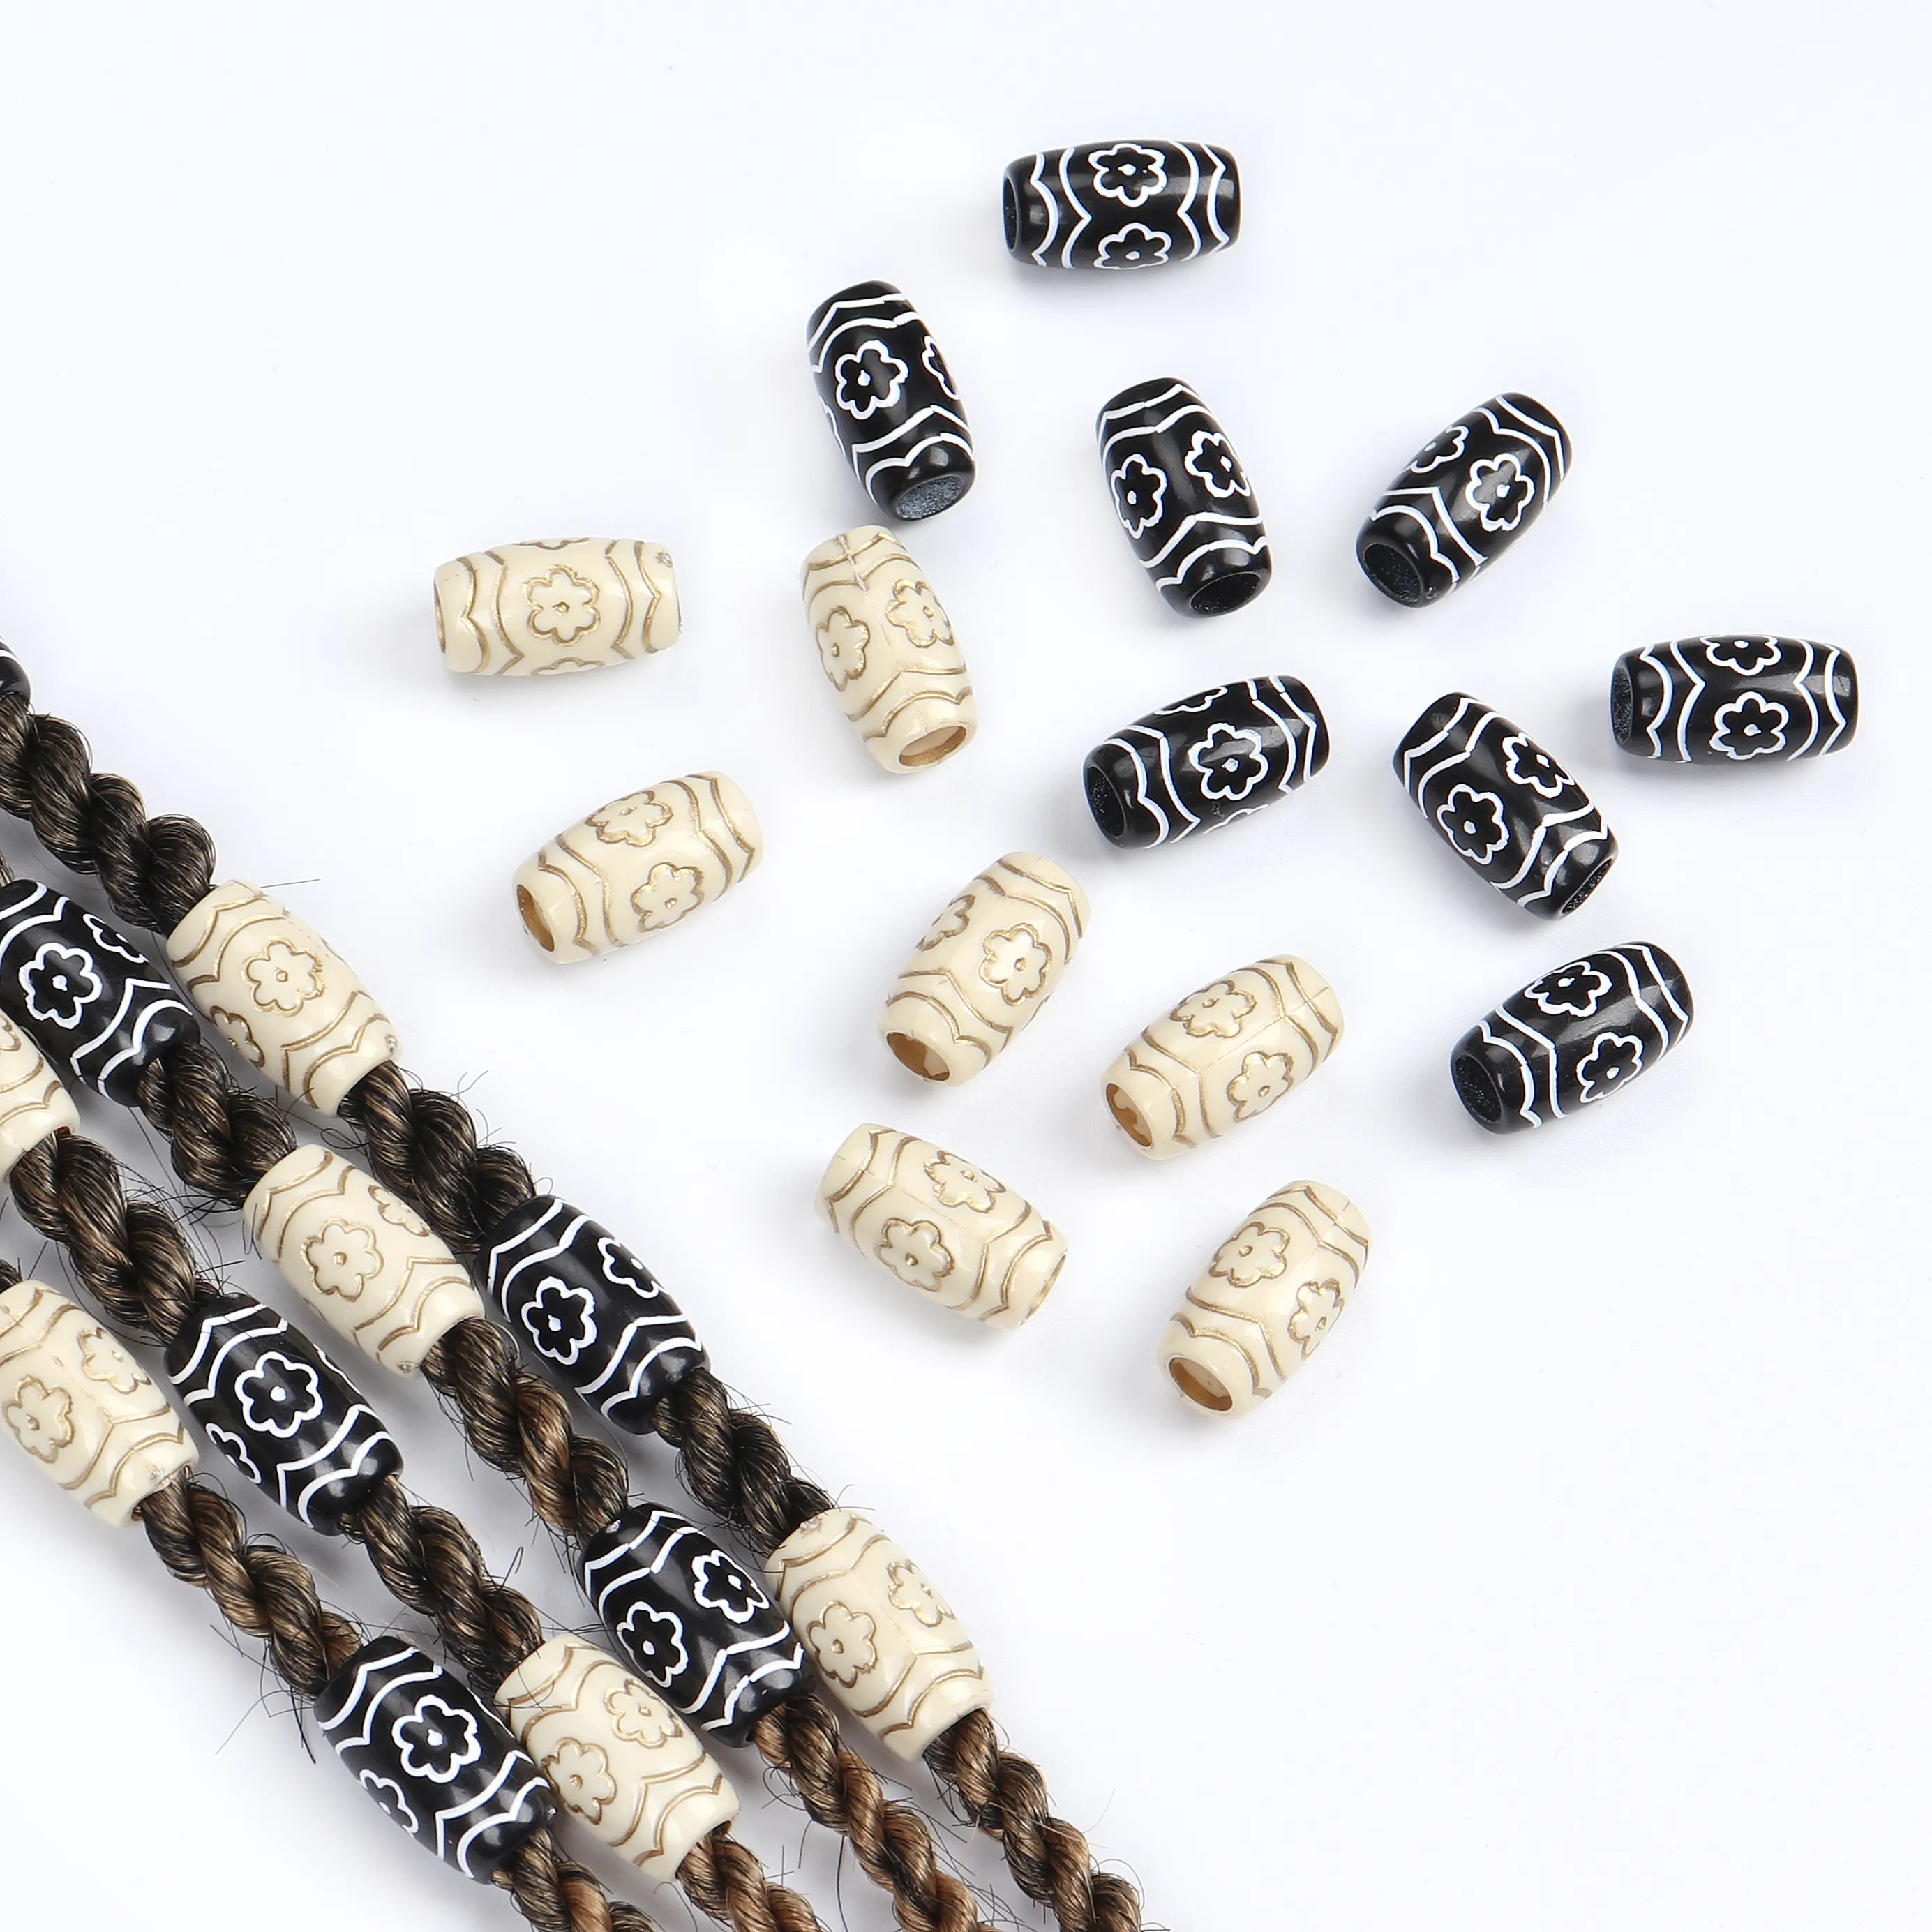 Wholesale High Quality 1PC White and Black Plastic Hair Dreadlock Beads for Hair Braiding Decorations